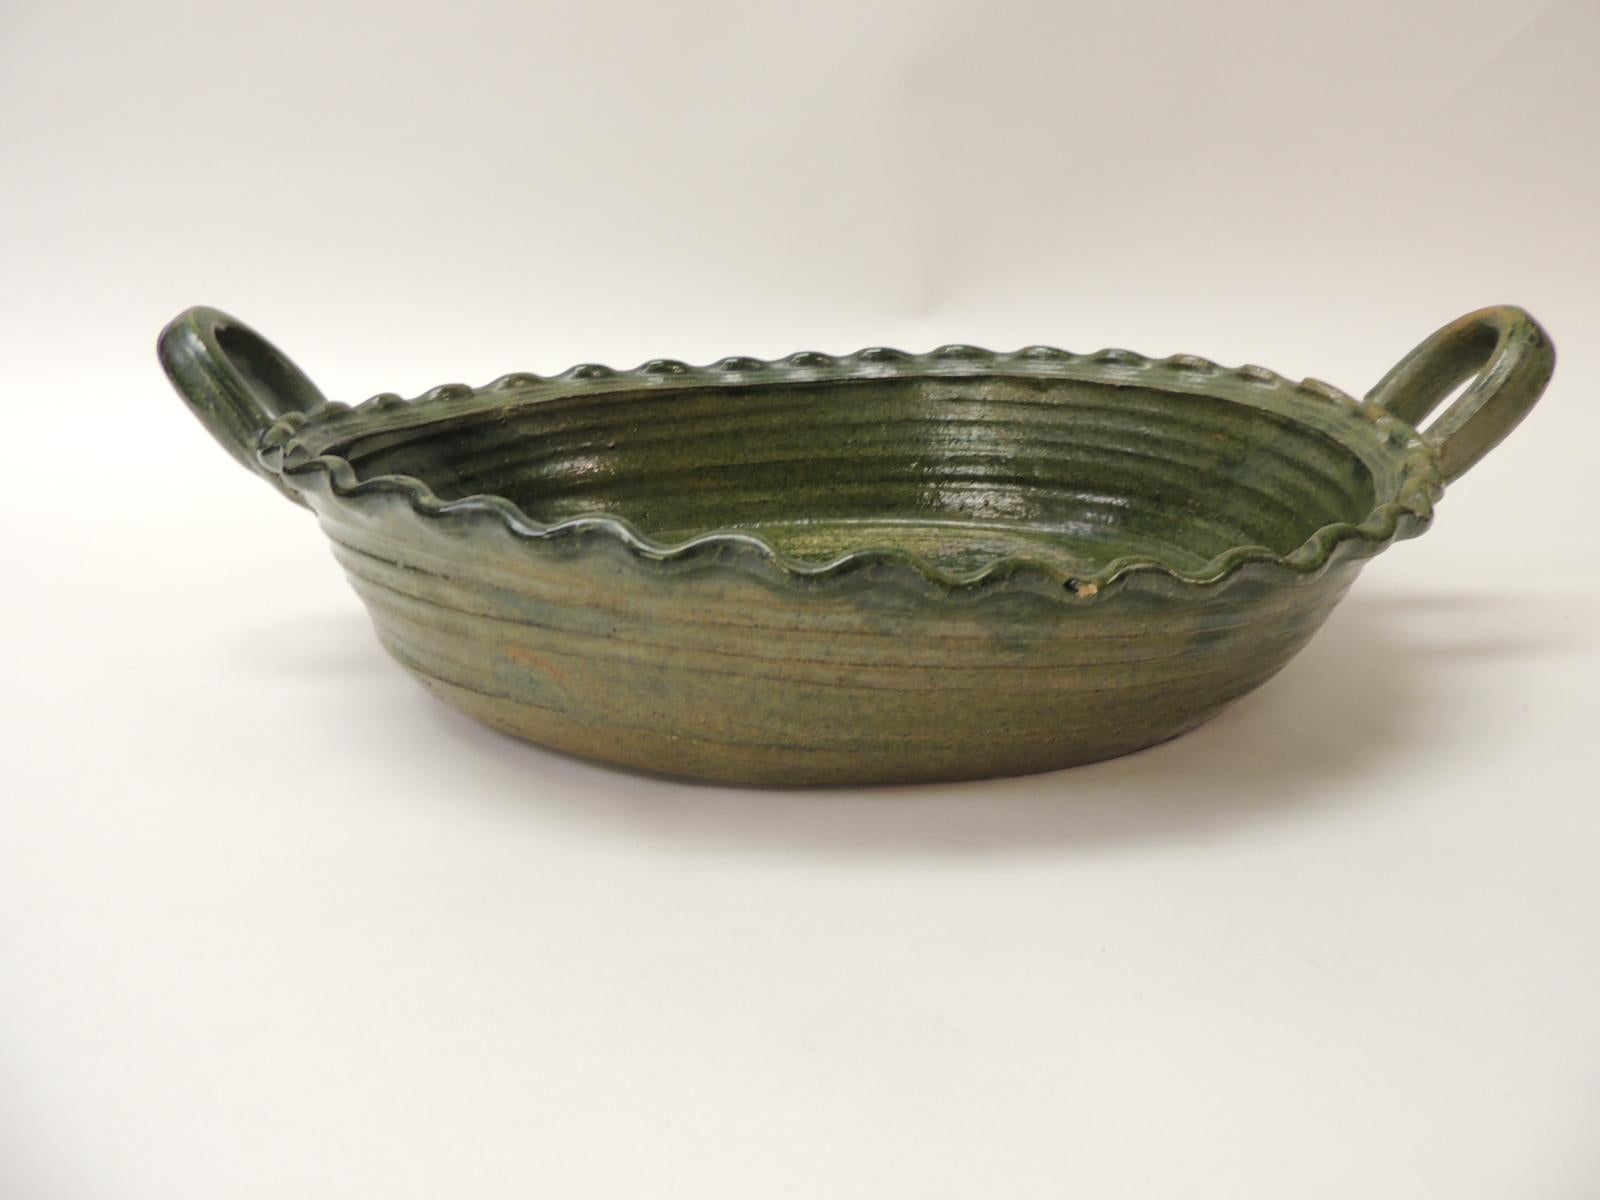 Large vintage Provincial green glazed terracotta oval serving bowl.
Oval earthenware serving bowl with handle and a large blooming flower in the centre of the dish.
Size: 15 x 10 x 3 H.